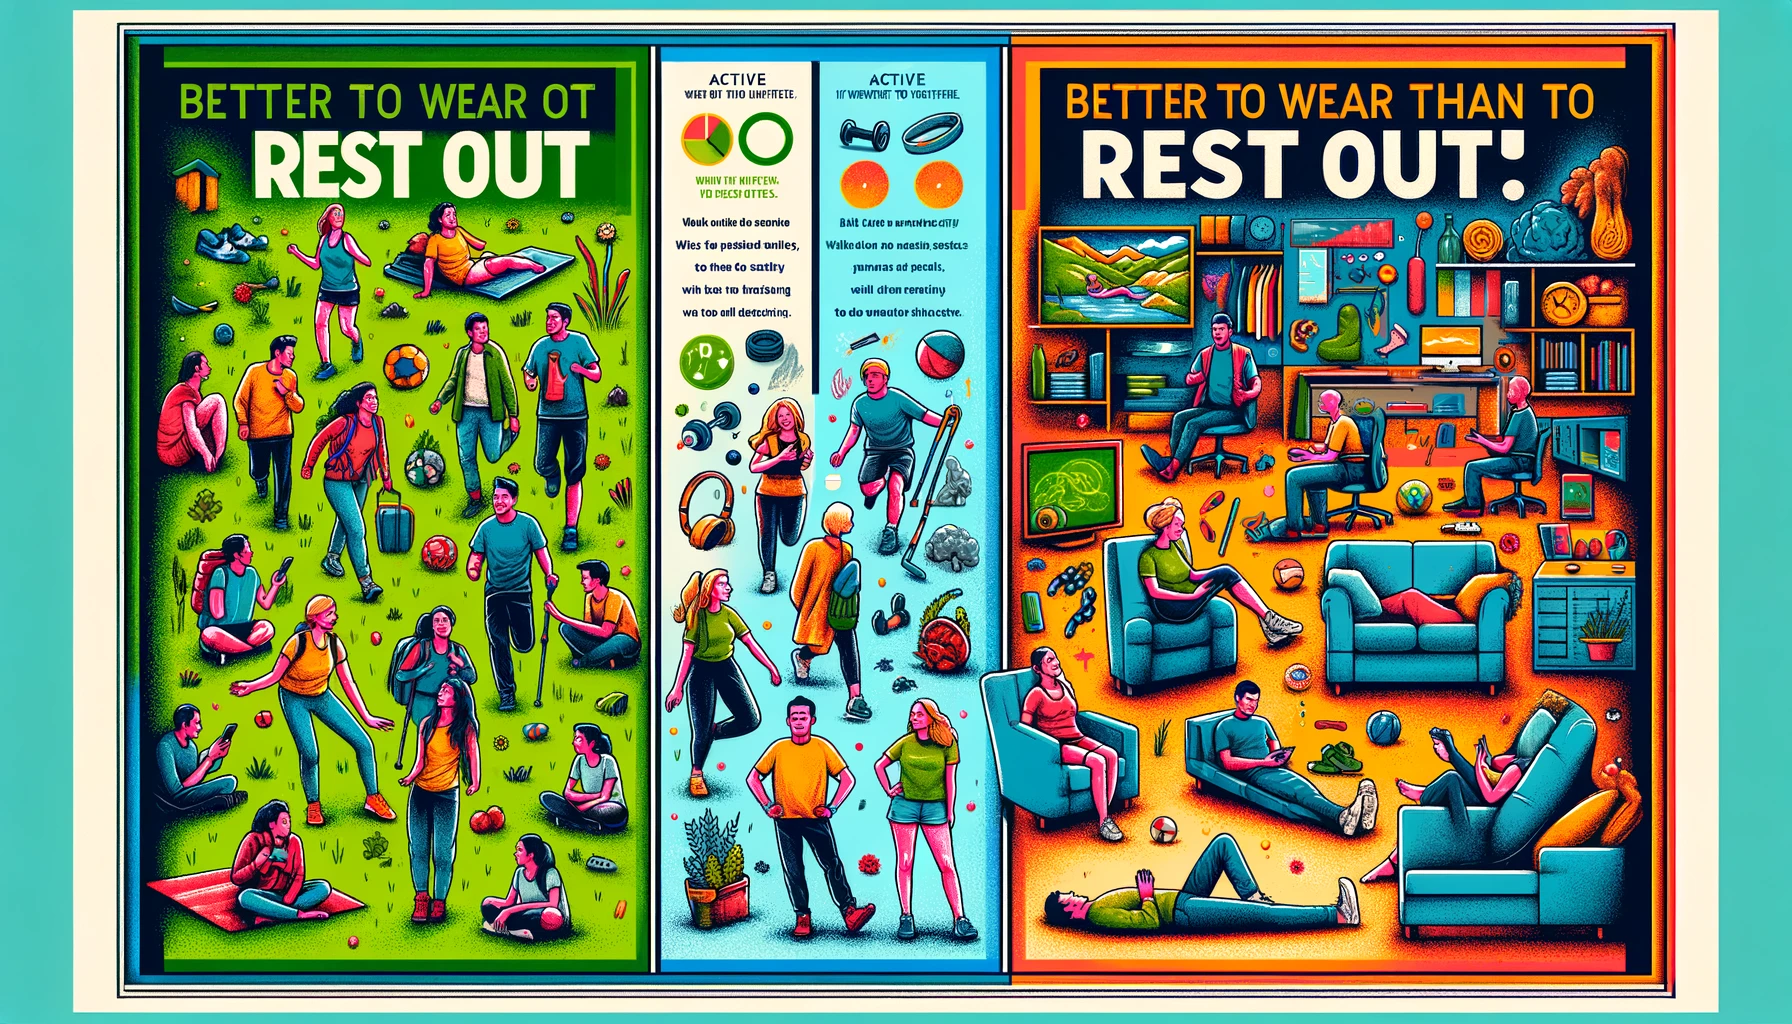 create infographic images at Better To Wear Out Than To Rest Out